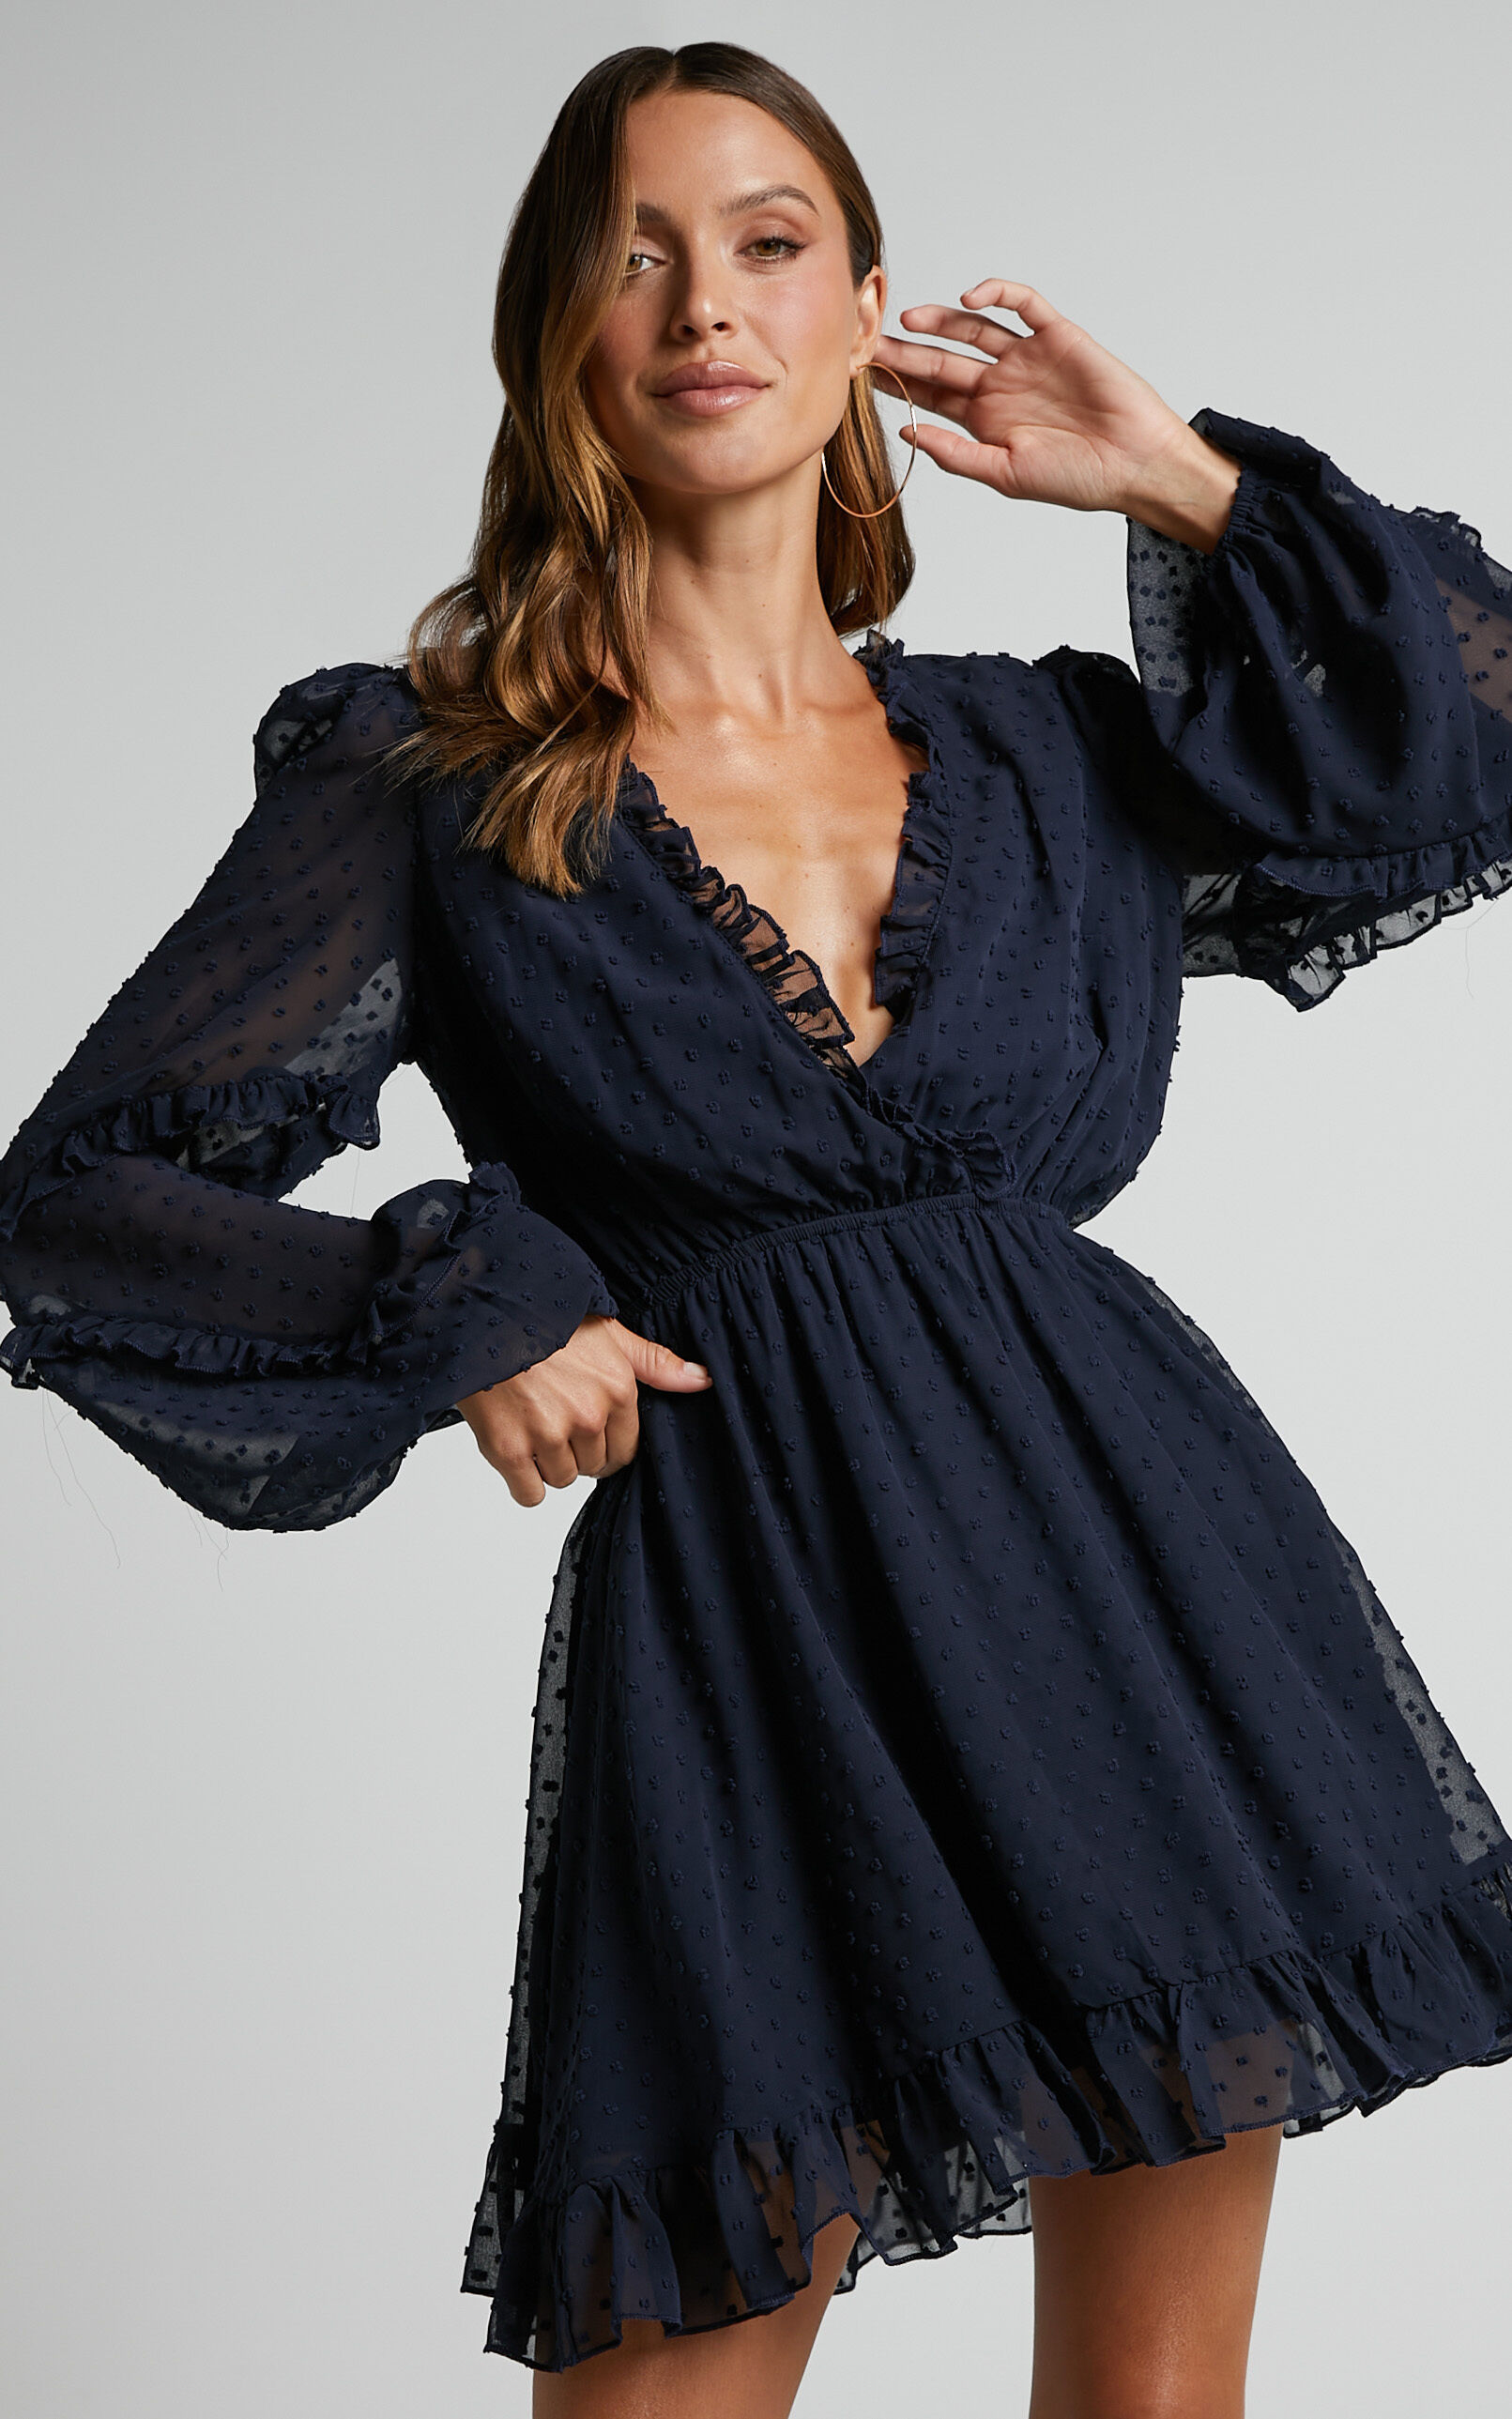 Sancha Long Sleeve Frill Mini Dress in Navy - 04, NVY1, super-hi-res image number null